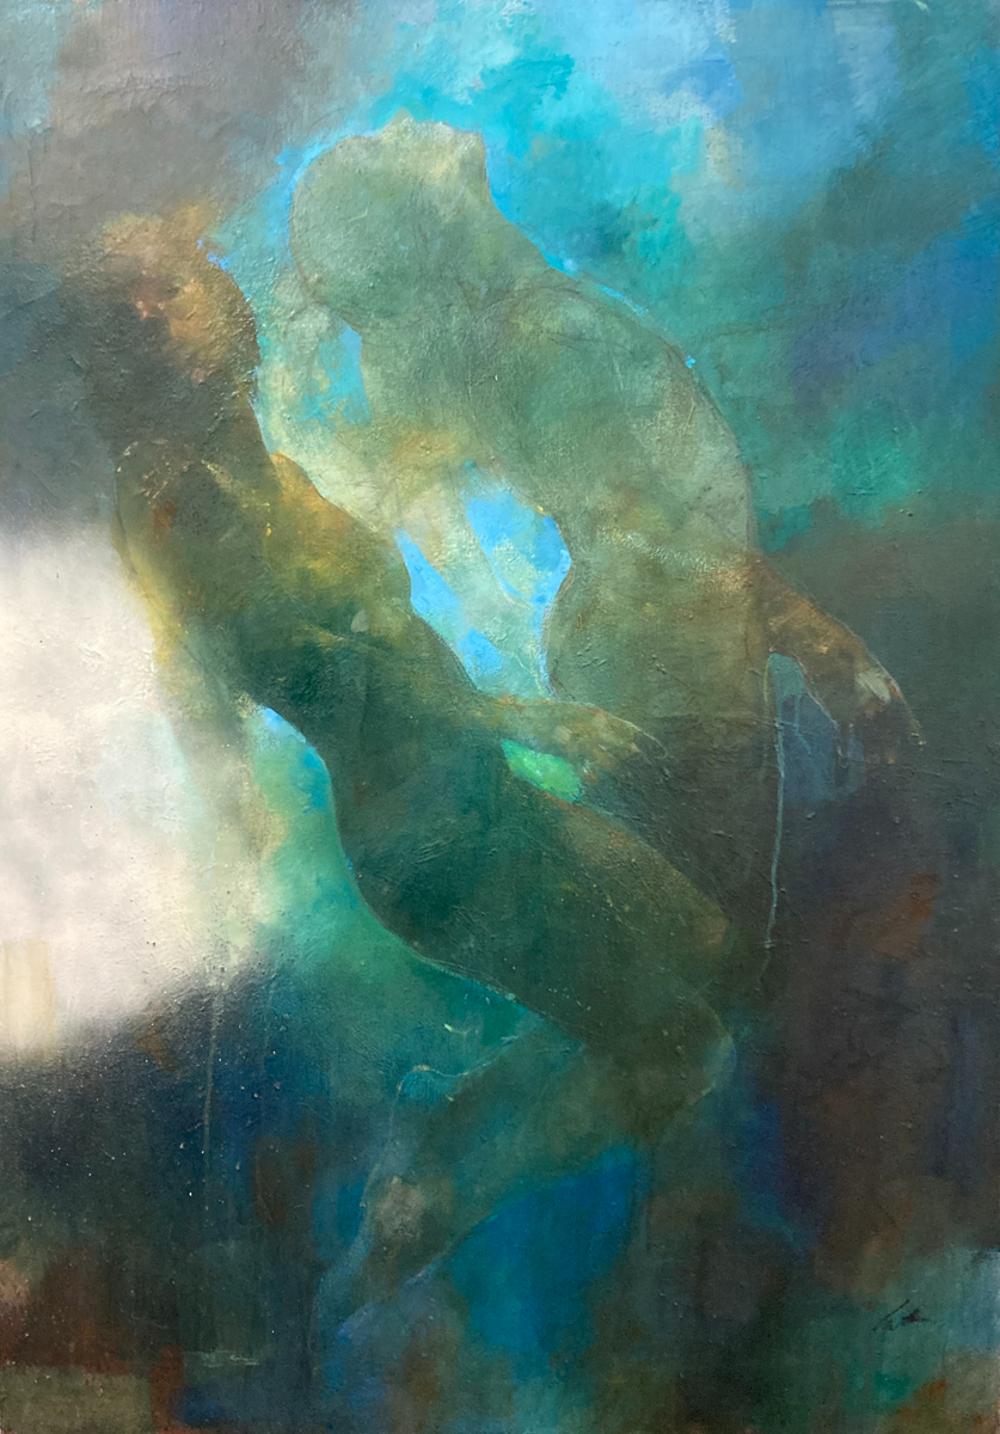 Bill Bate Nude Painting - Horizon Light - Atmospheric, Other-worldly Nudes: Oil Paint on Canvas